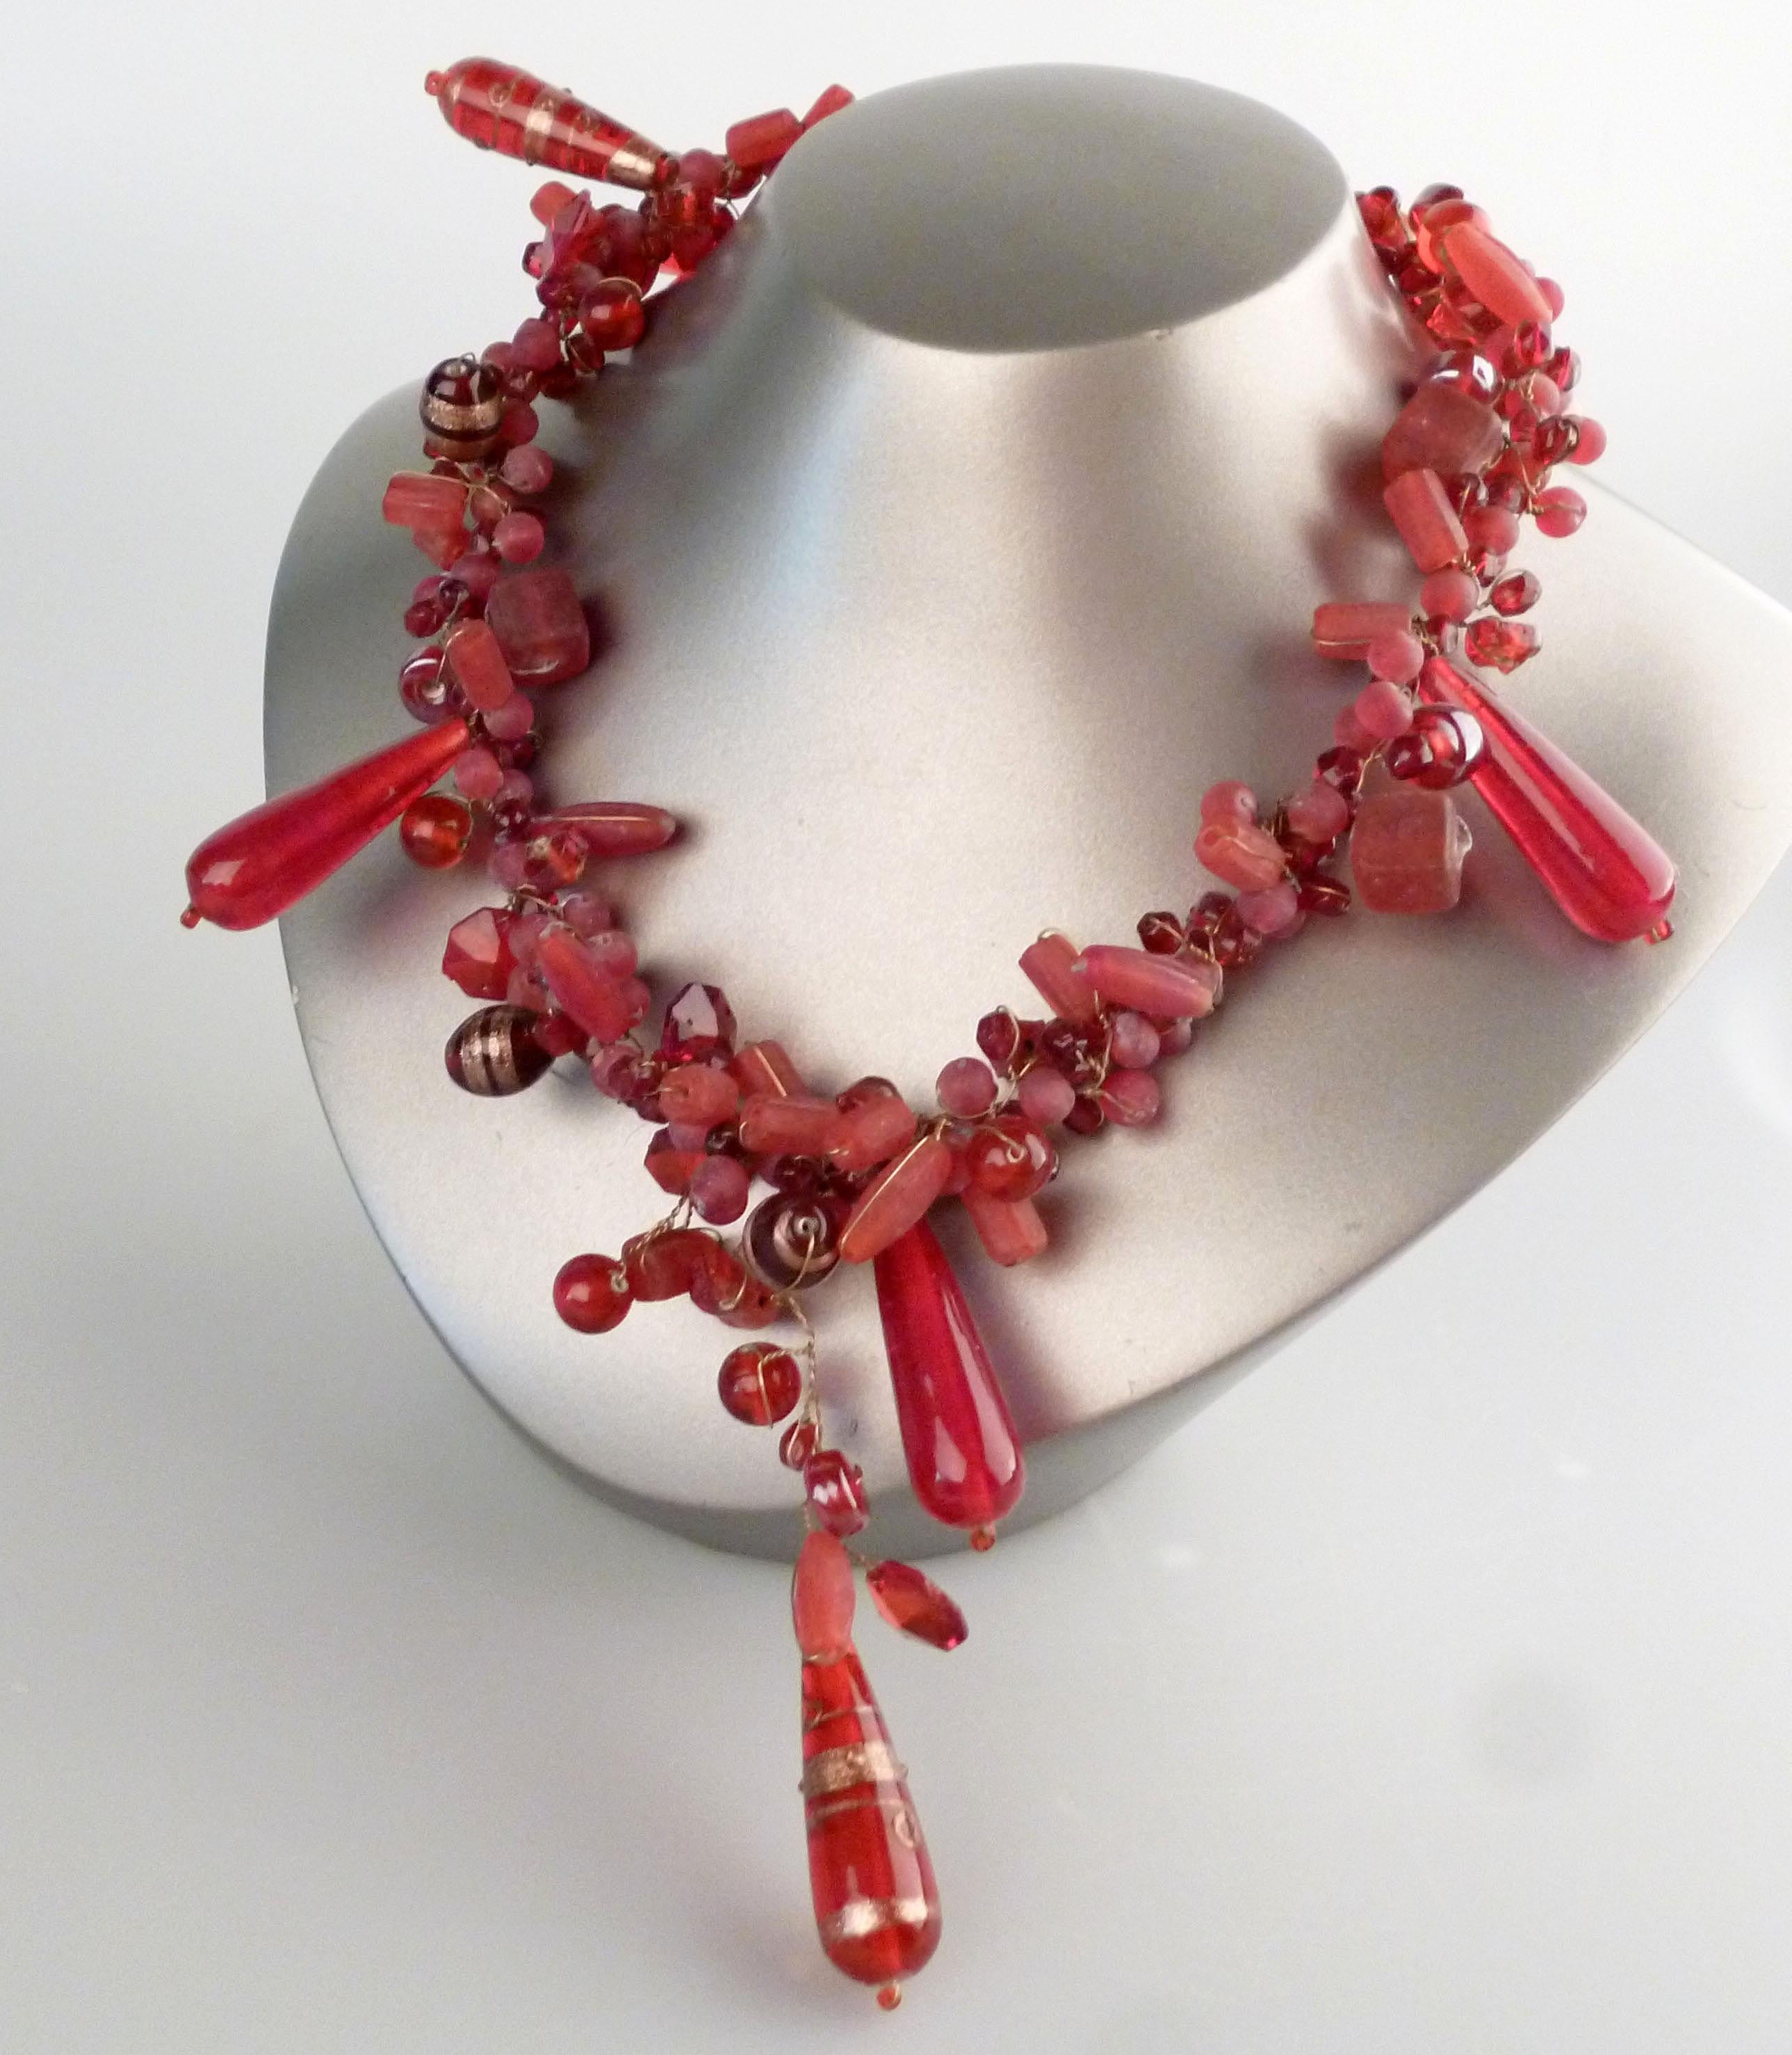 Vintage handcrafted necklace adorned with red Venetian glass beads and ornaments.